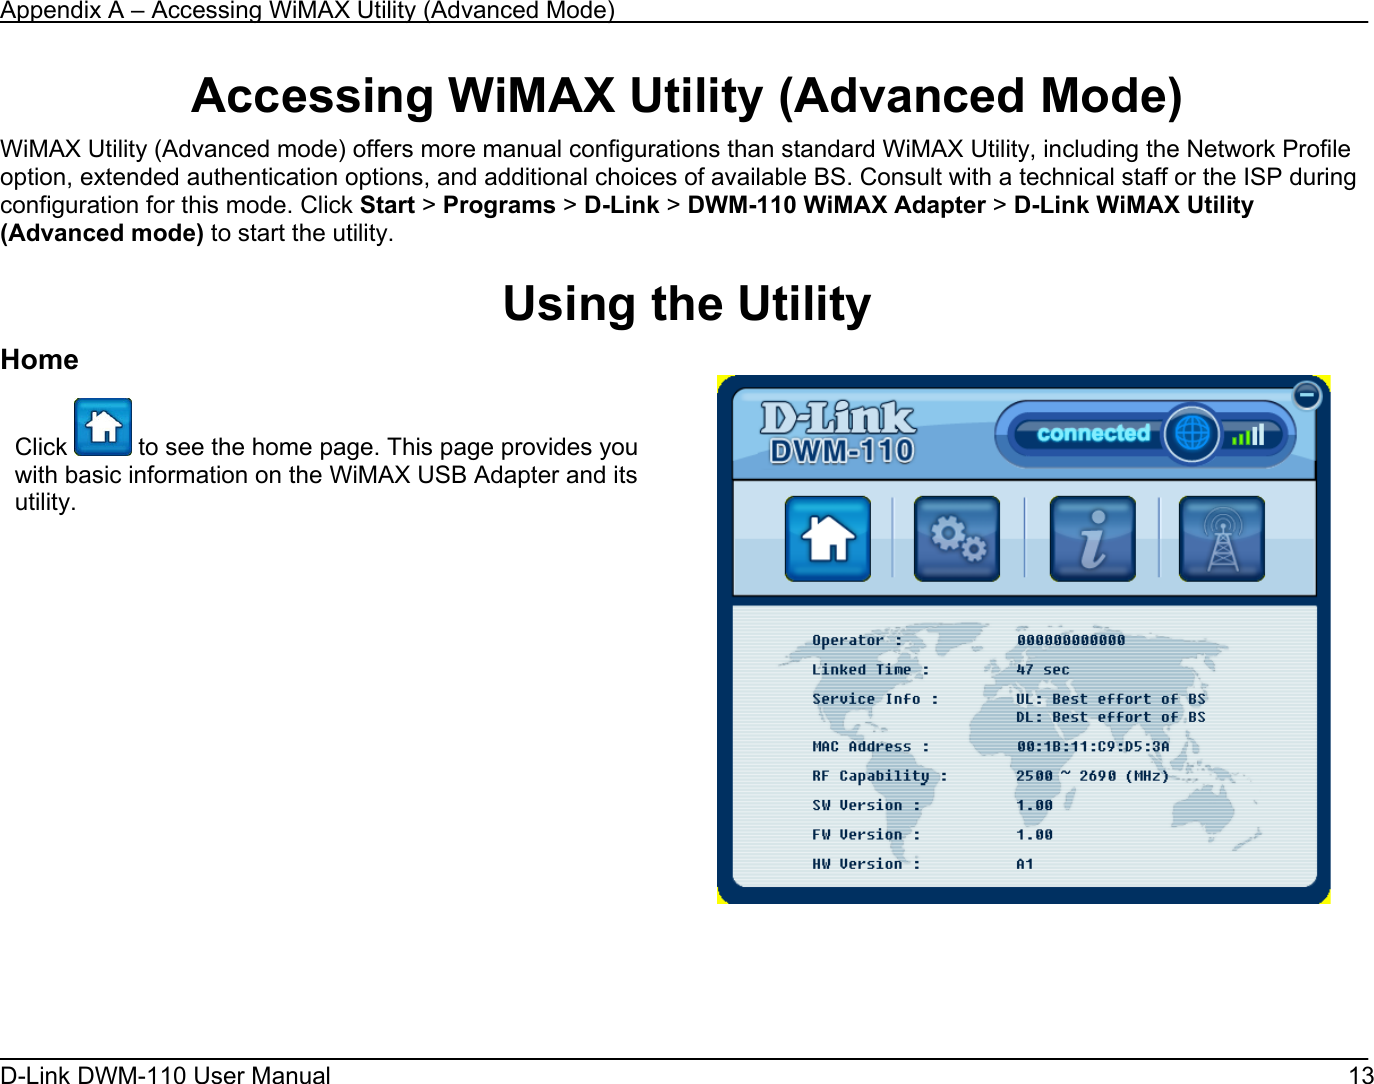 Appendix A – Accessing WiMAX Utility (Advanced Mode) D-Link DWM-110 User Manual   13 Accessing WiMAX Utility (Advanced Mode) WiMAX Utility (Advanced mode) offers more manual configurations than standard WiMAX Utility, including the Network Profile option, extended authentication options, and additional choices of available BS. Consult with a technical staff or the ISP during configuration for this mode. Click Start &gt; Programs &gt; D-Link &gt; DWM-110 WiMAX Adapter &gt; D-Link WiMAX Utility  (Advanced mode) to start the utility.  Using the Utility Home     Click   to see the home page. This page provides you with basic information on the WiMAX USB Adapter and its utility.              